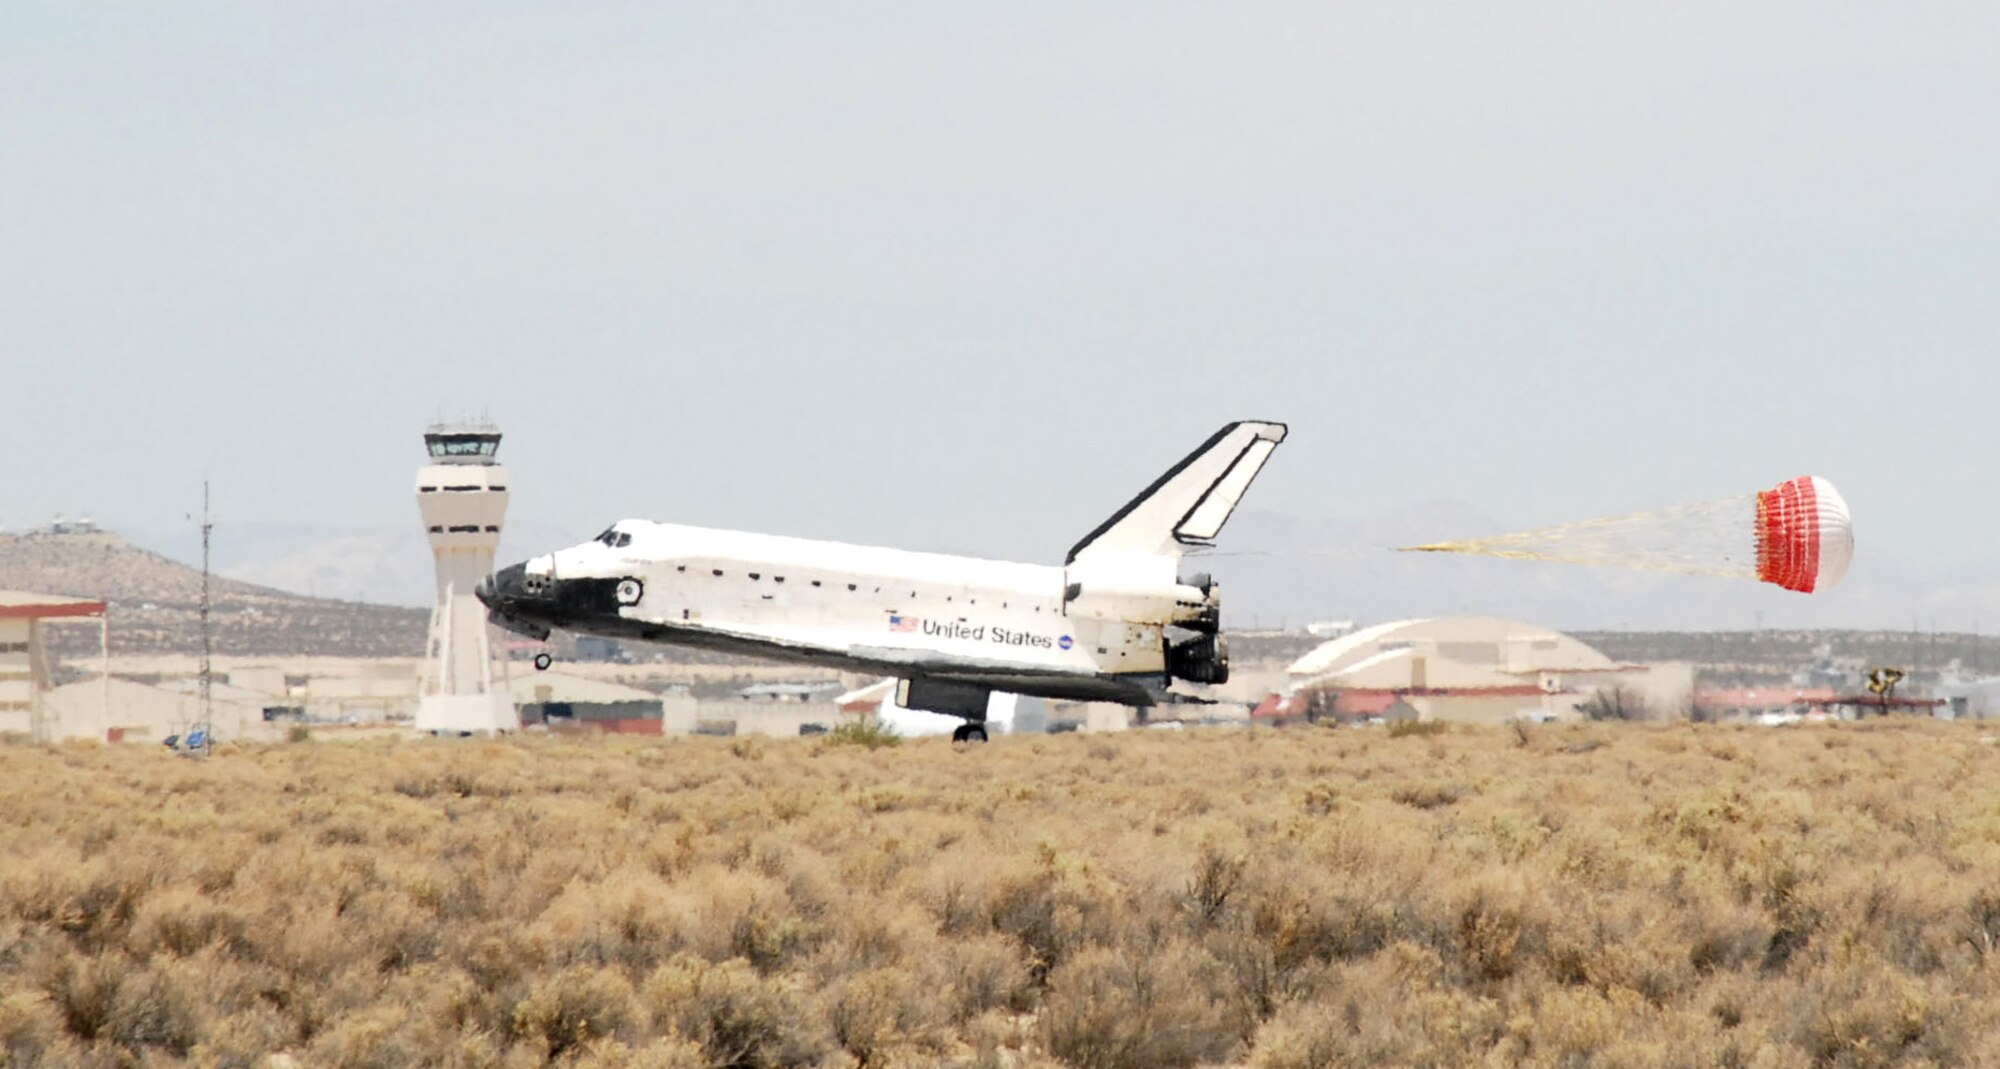 EDWARDS AIR FORCE BASE, Calif. -- Space Shuttle Atlantis, STS-117, performs a successful landing at Edwards on June 22. The shuttle started its mission June 8 to perform maintenance on the International Space Station. STS-117 was the 21st mission to the space station and the 118th shuttle mission overall. The Atlantis landing marks Edwards' 51st shuttle landing. The next shuttle mission is scheduled to launch in August. (Photo by Senior Airman Jason Hernandez)